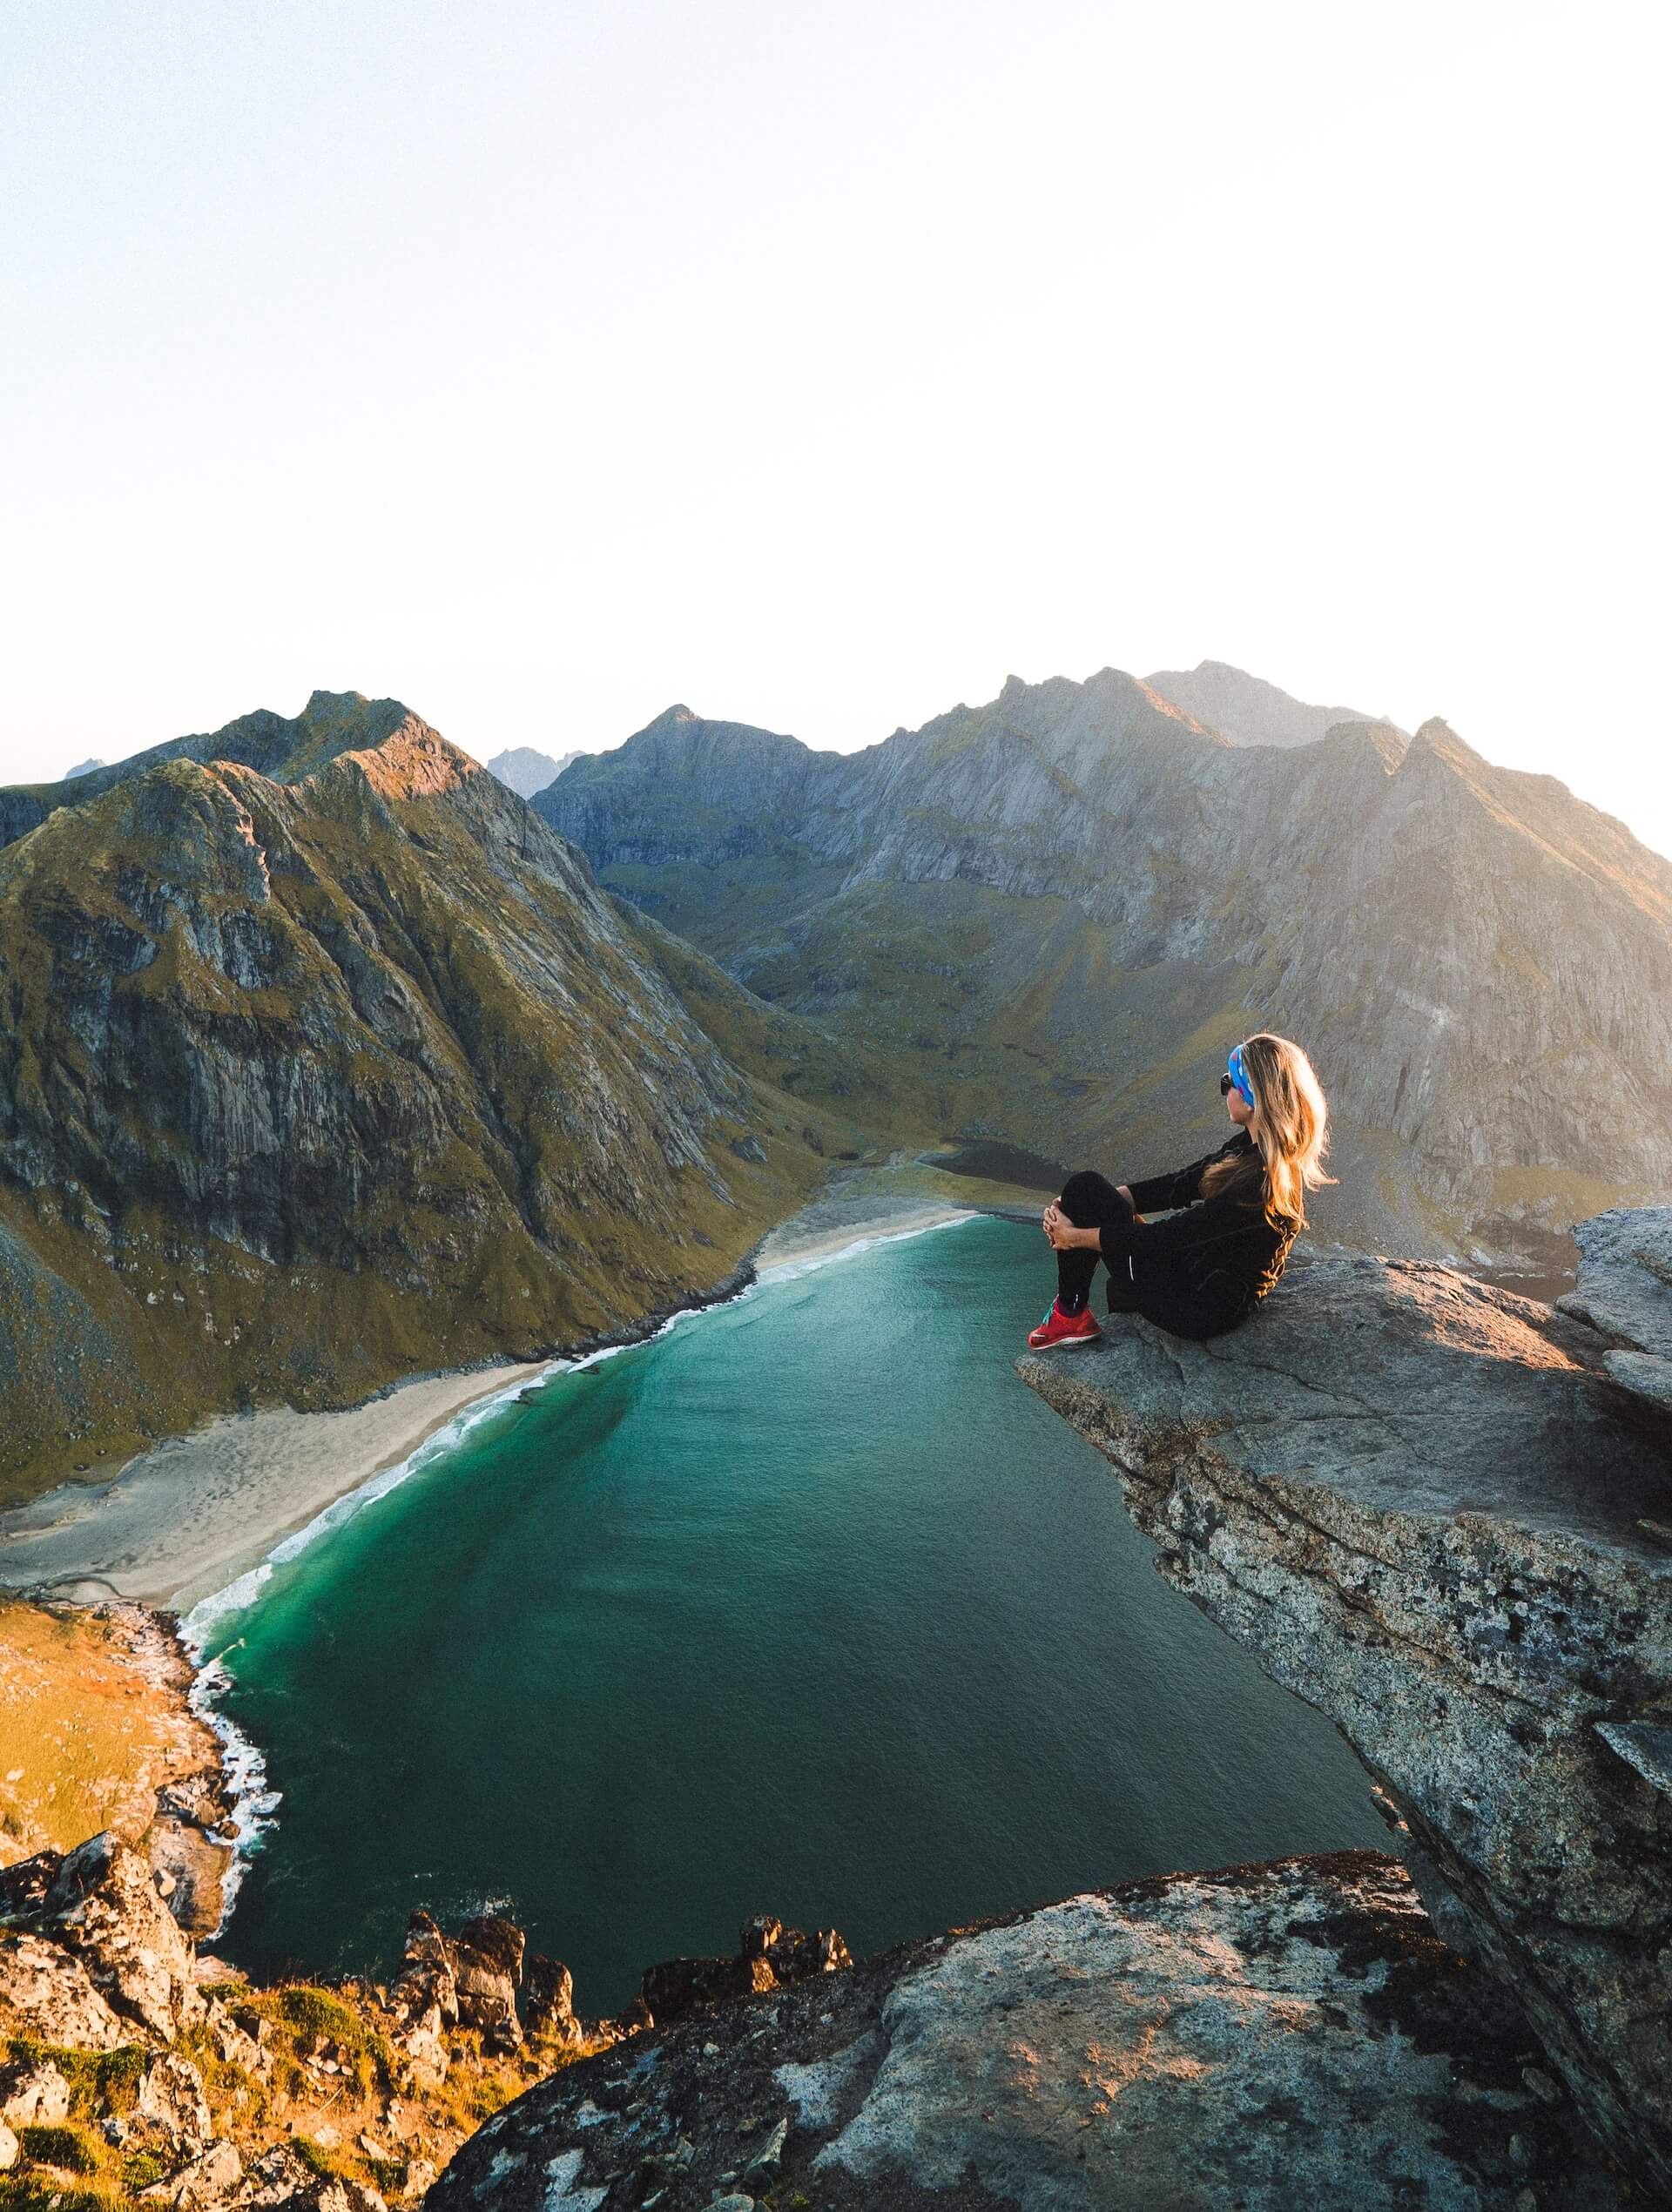 Adventurous Solo Female Travel: Destinations You’ll Love and Safety Tips You Need